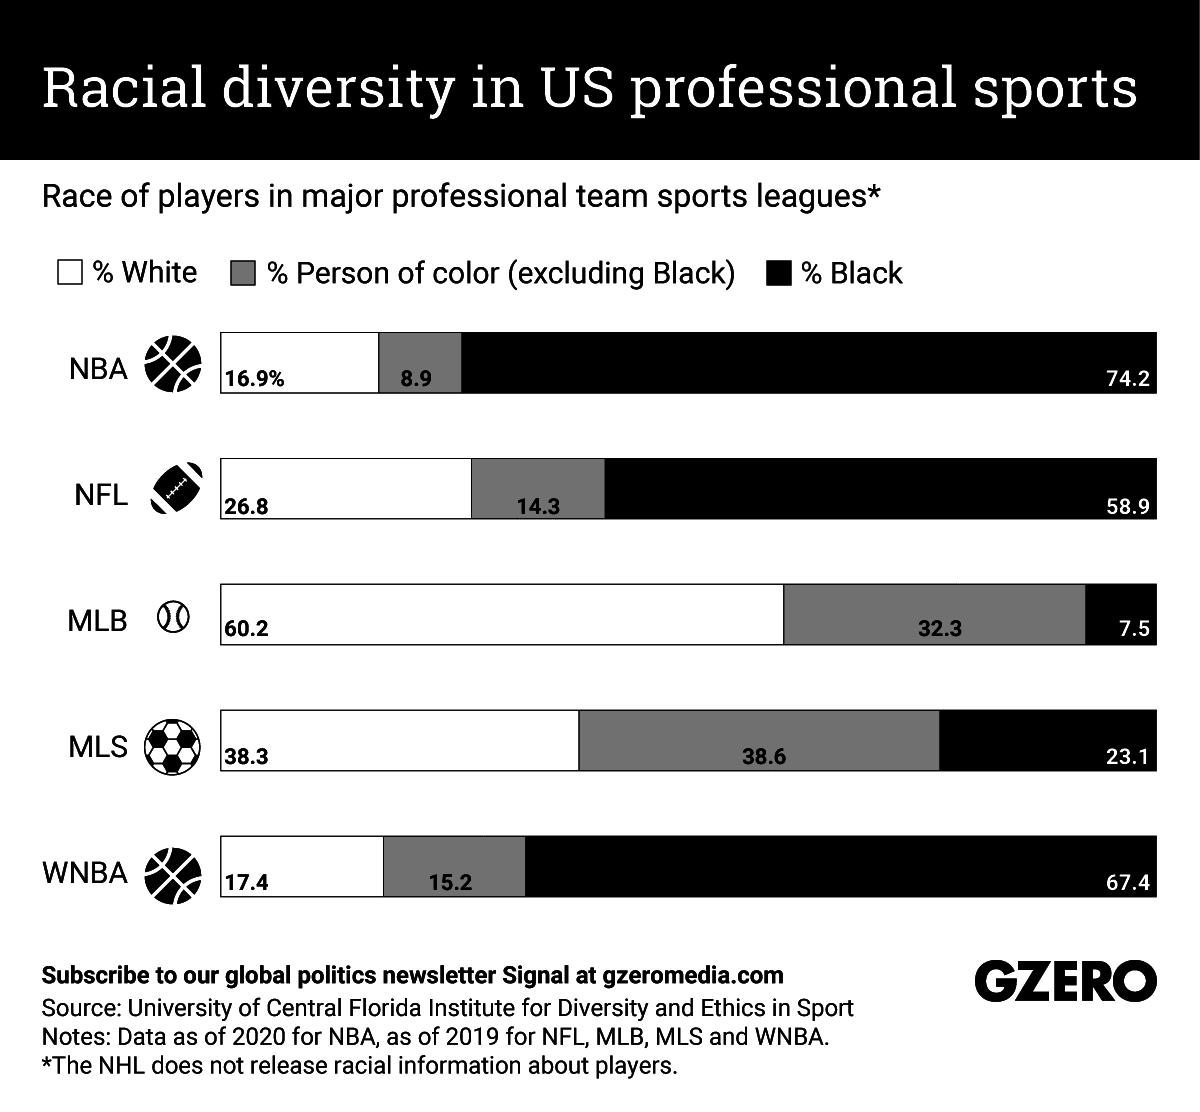 The Graphic Truth: Racial diversity in US professional sports